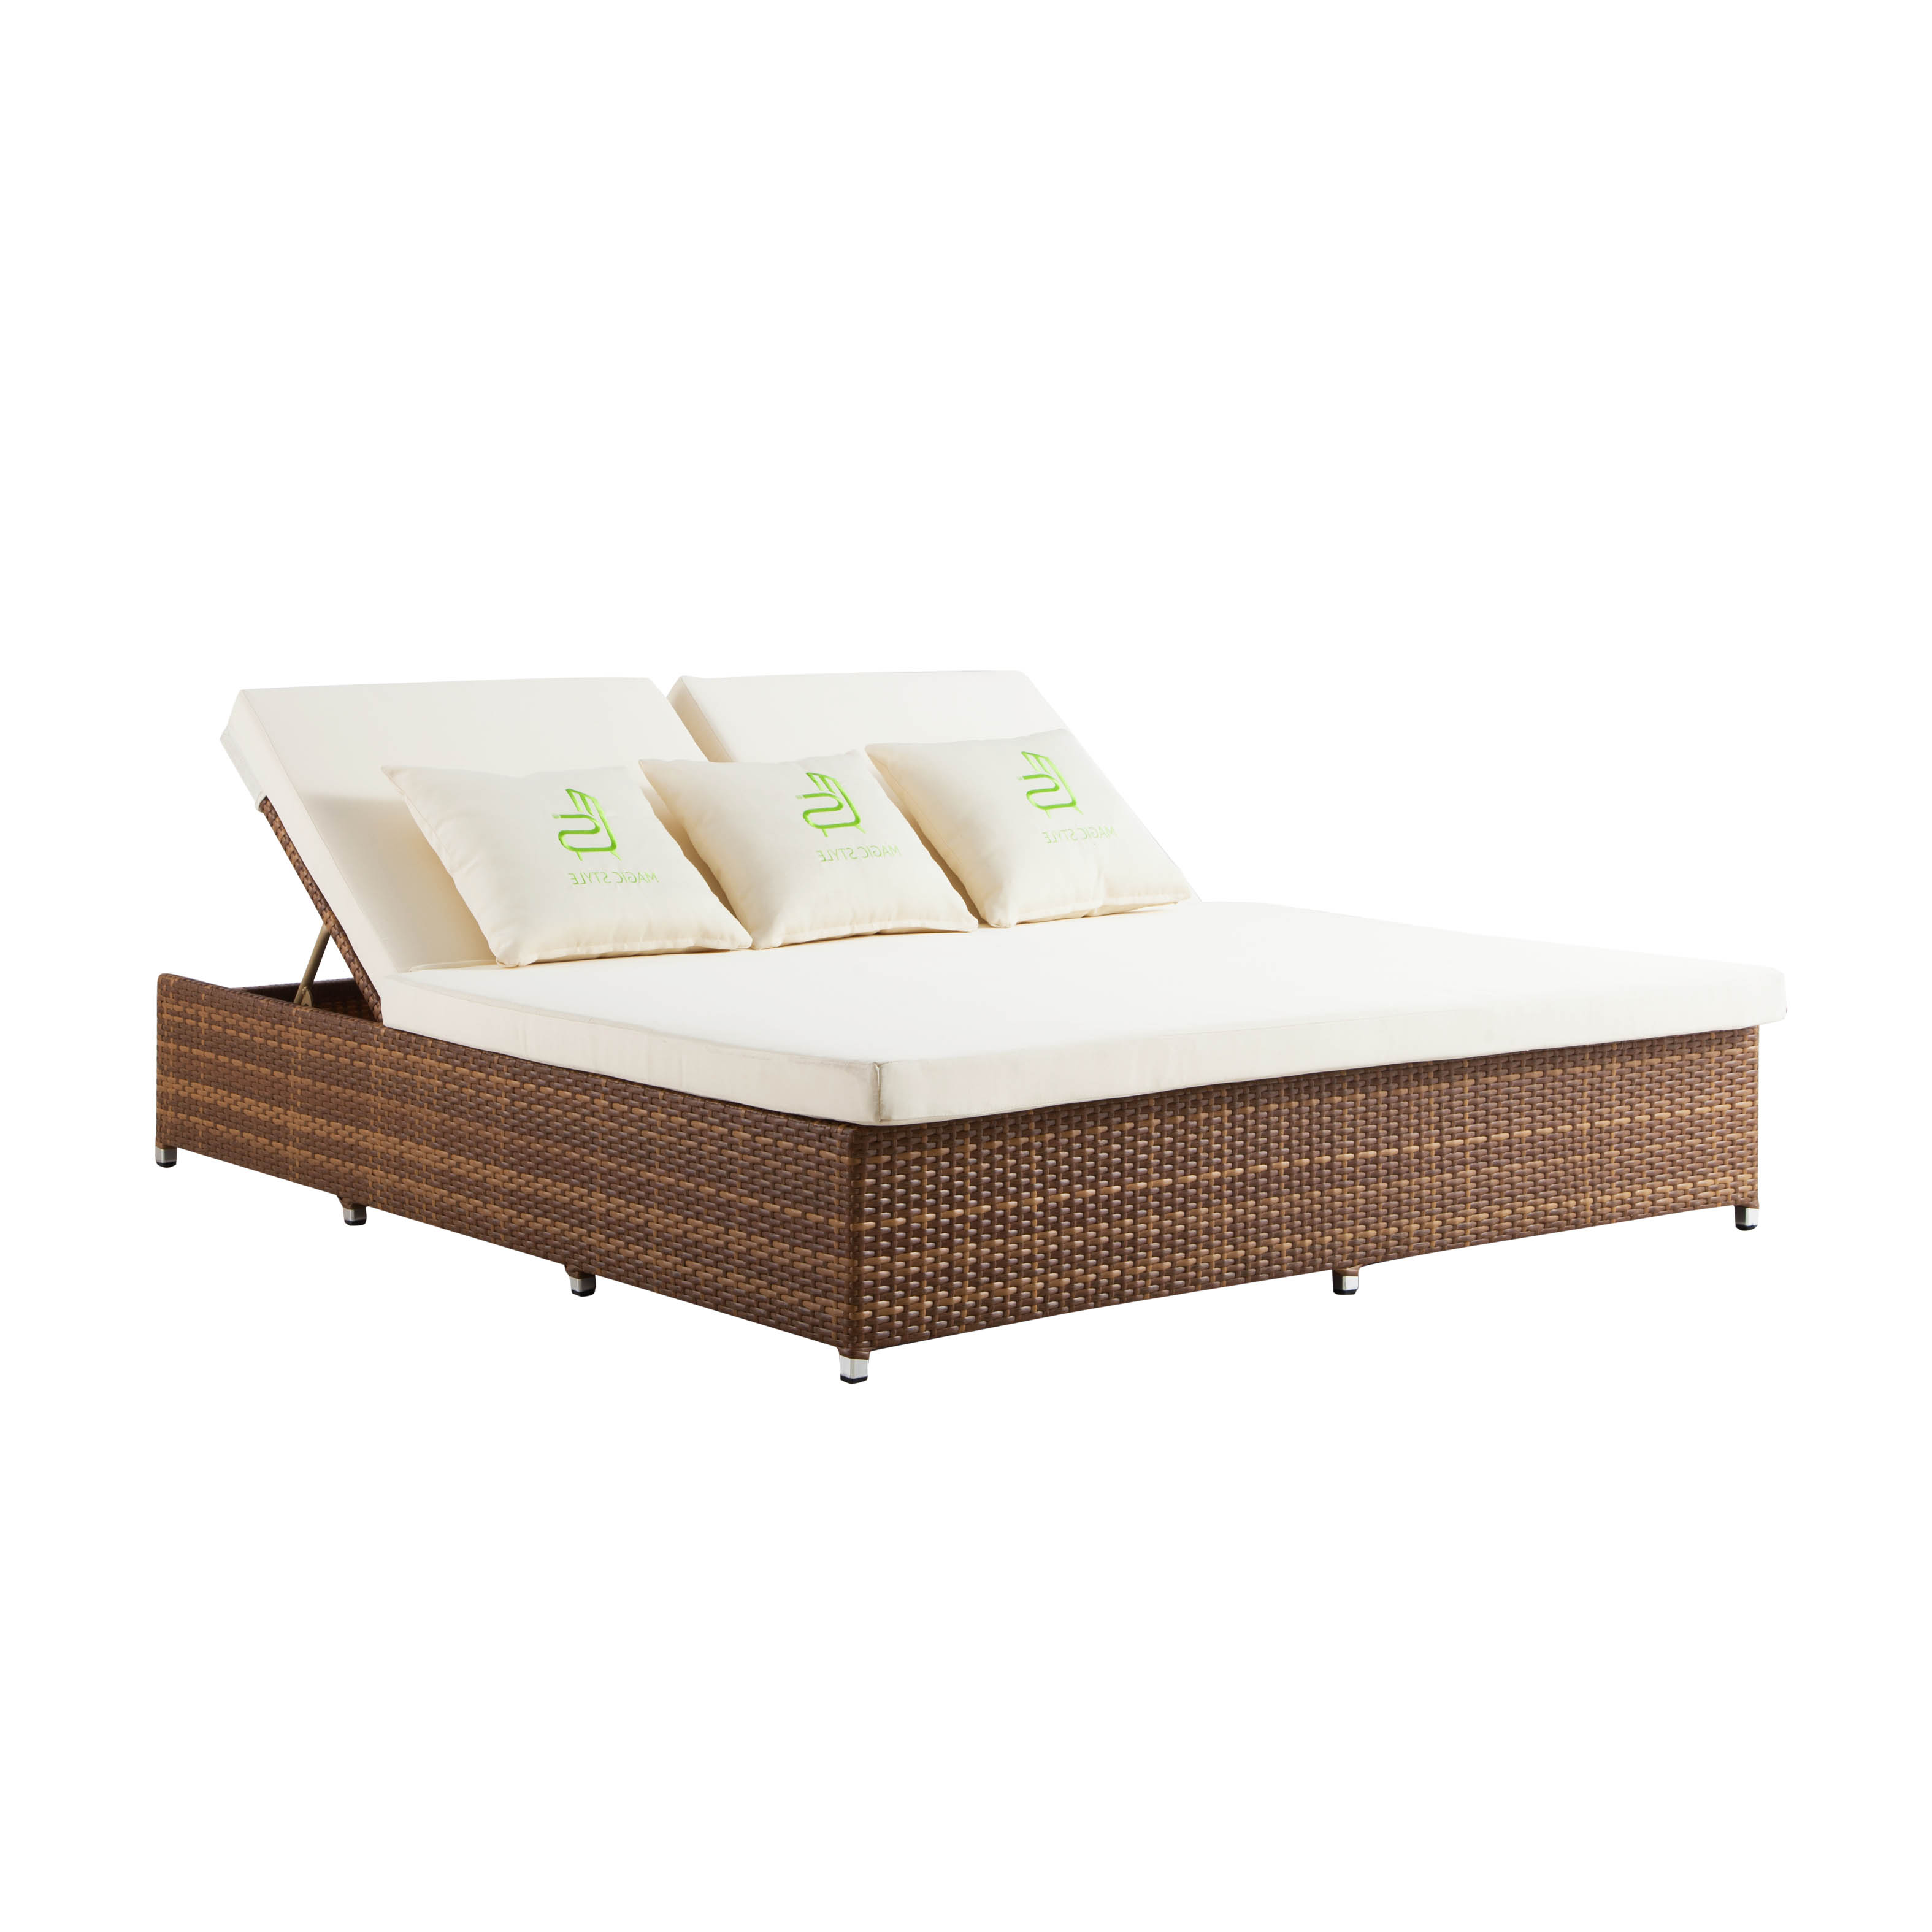 Angela rotan daybed S3